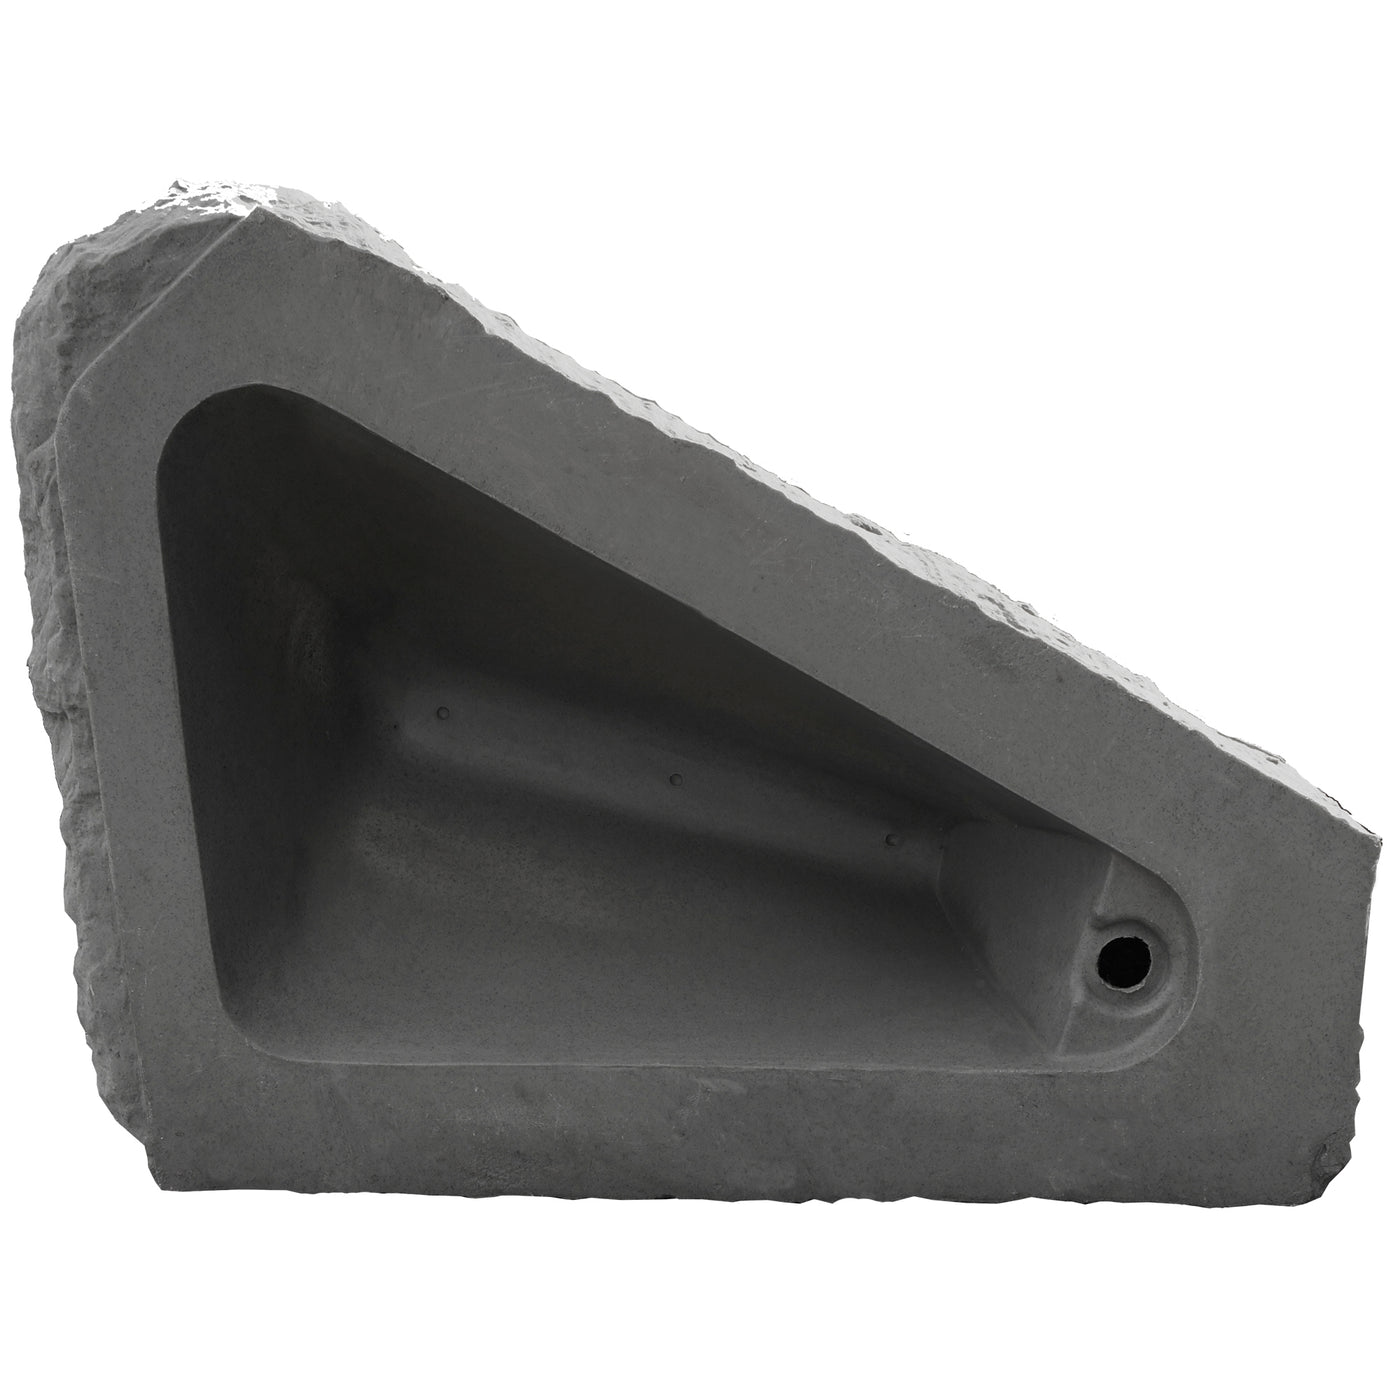 ERG 2000 Right Triangle Rock- Grey/Armour Stone - GreenLivingSupply-Store